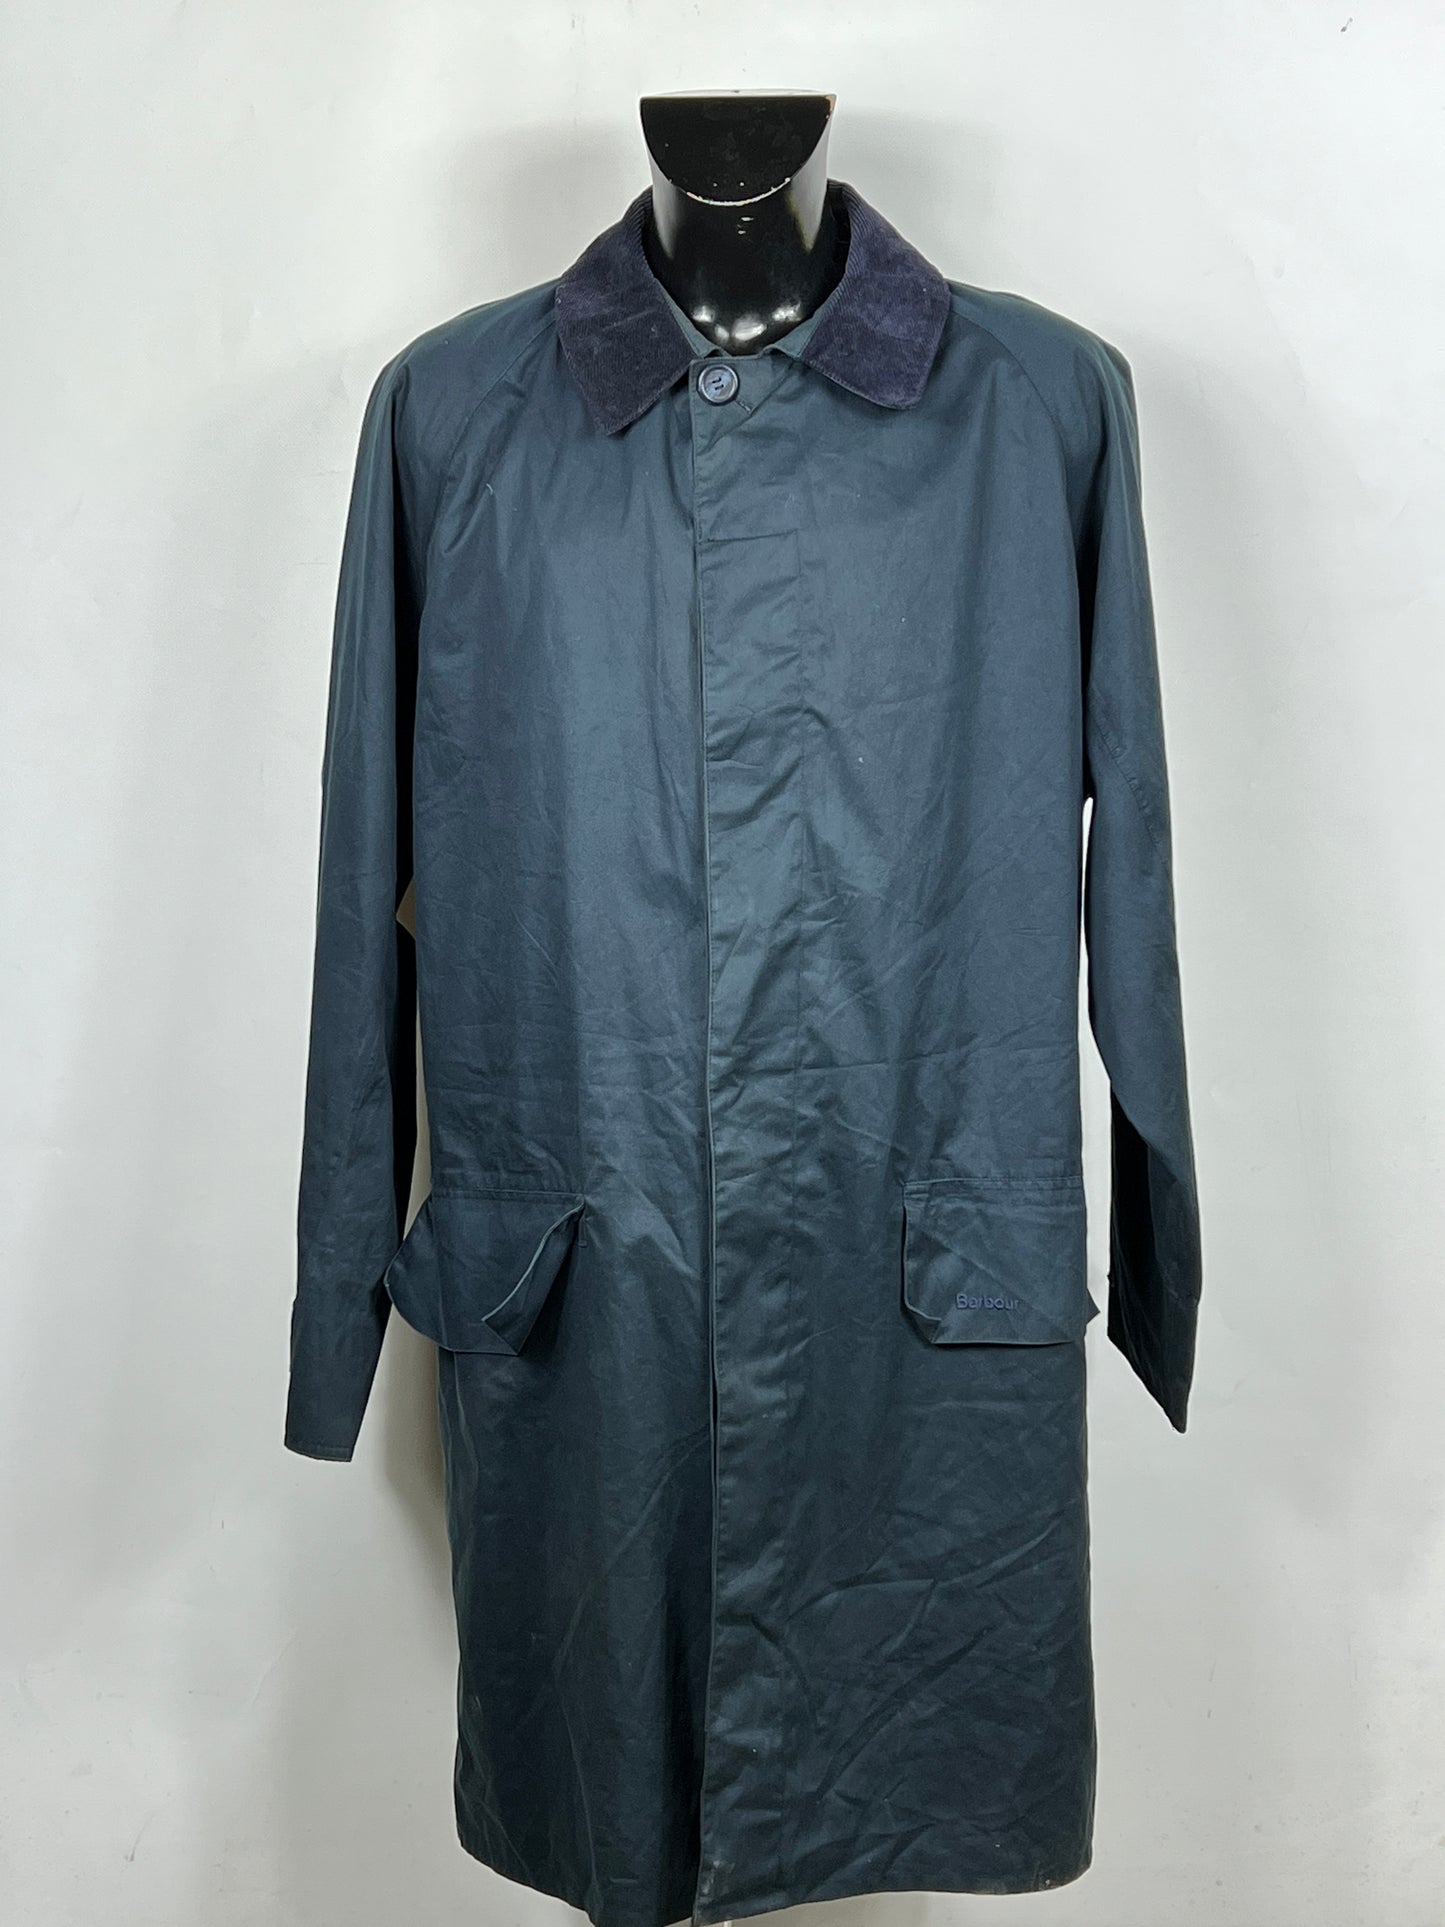 Barbour Trench blu da uomo in cotone XL Man Navy Trench cotton coat Size XL